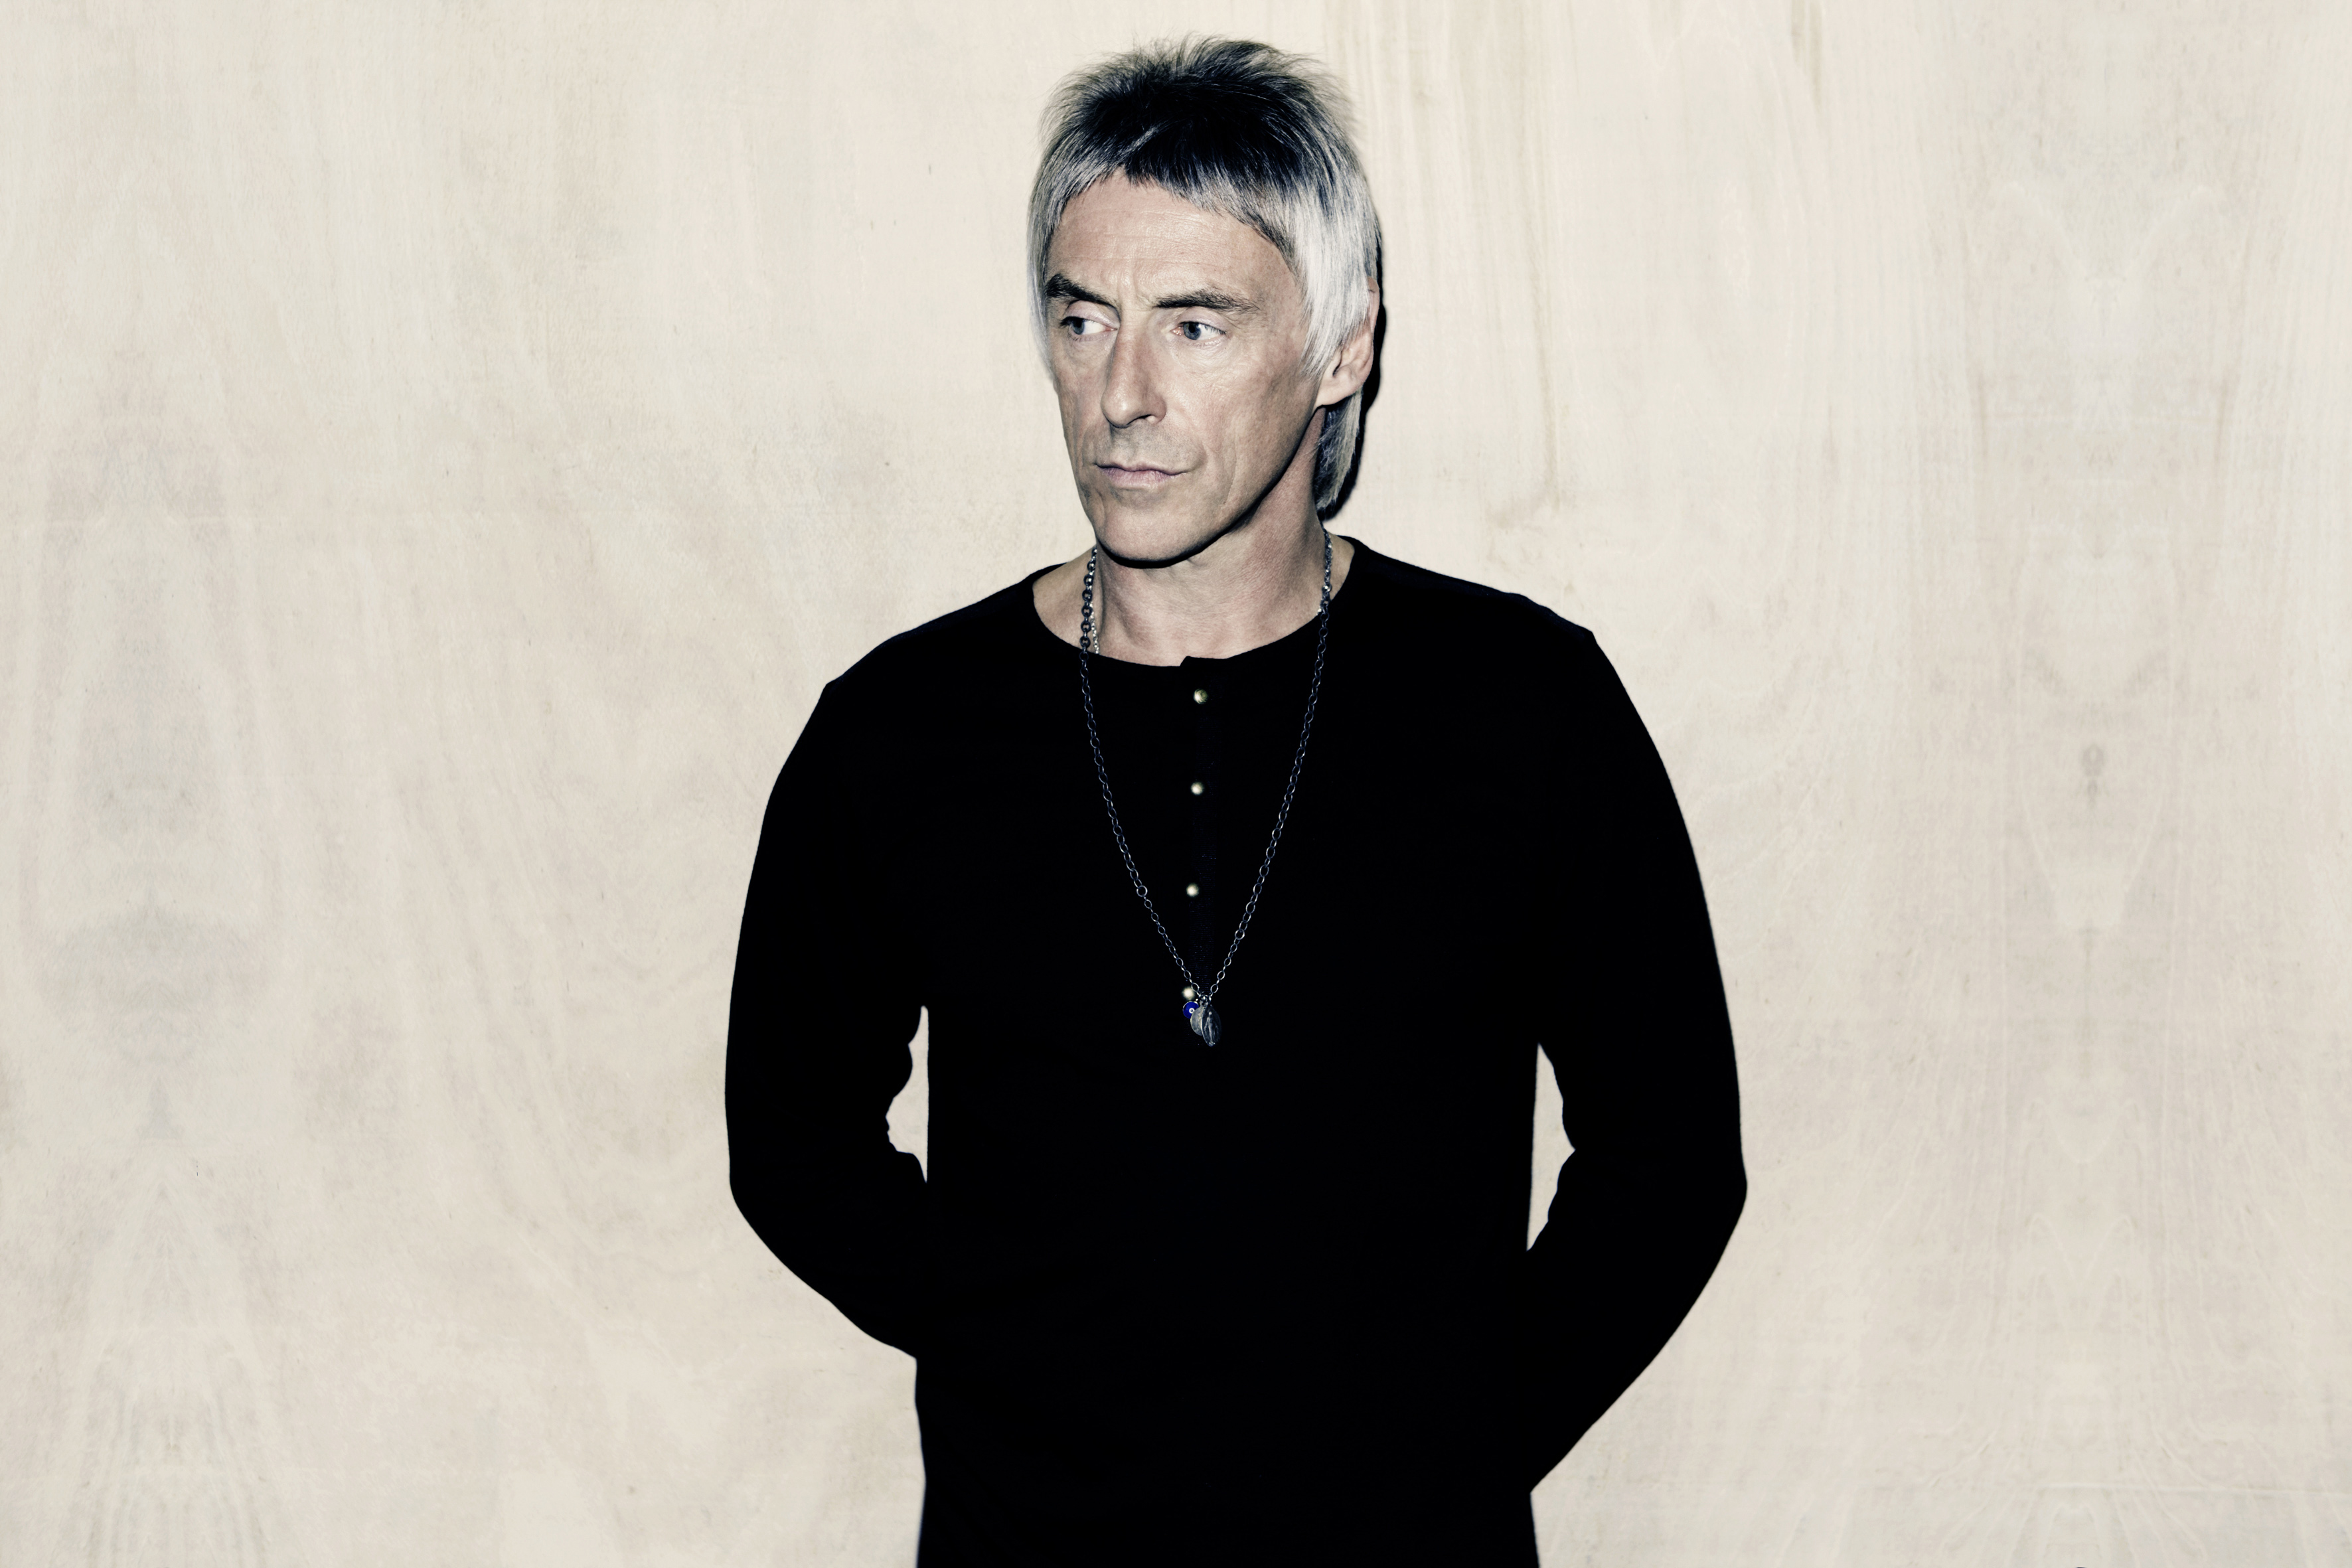 HD Quality Wallpaper | Collection: Music, 3543x2362 Paul Weller